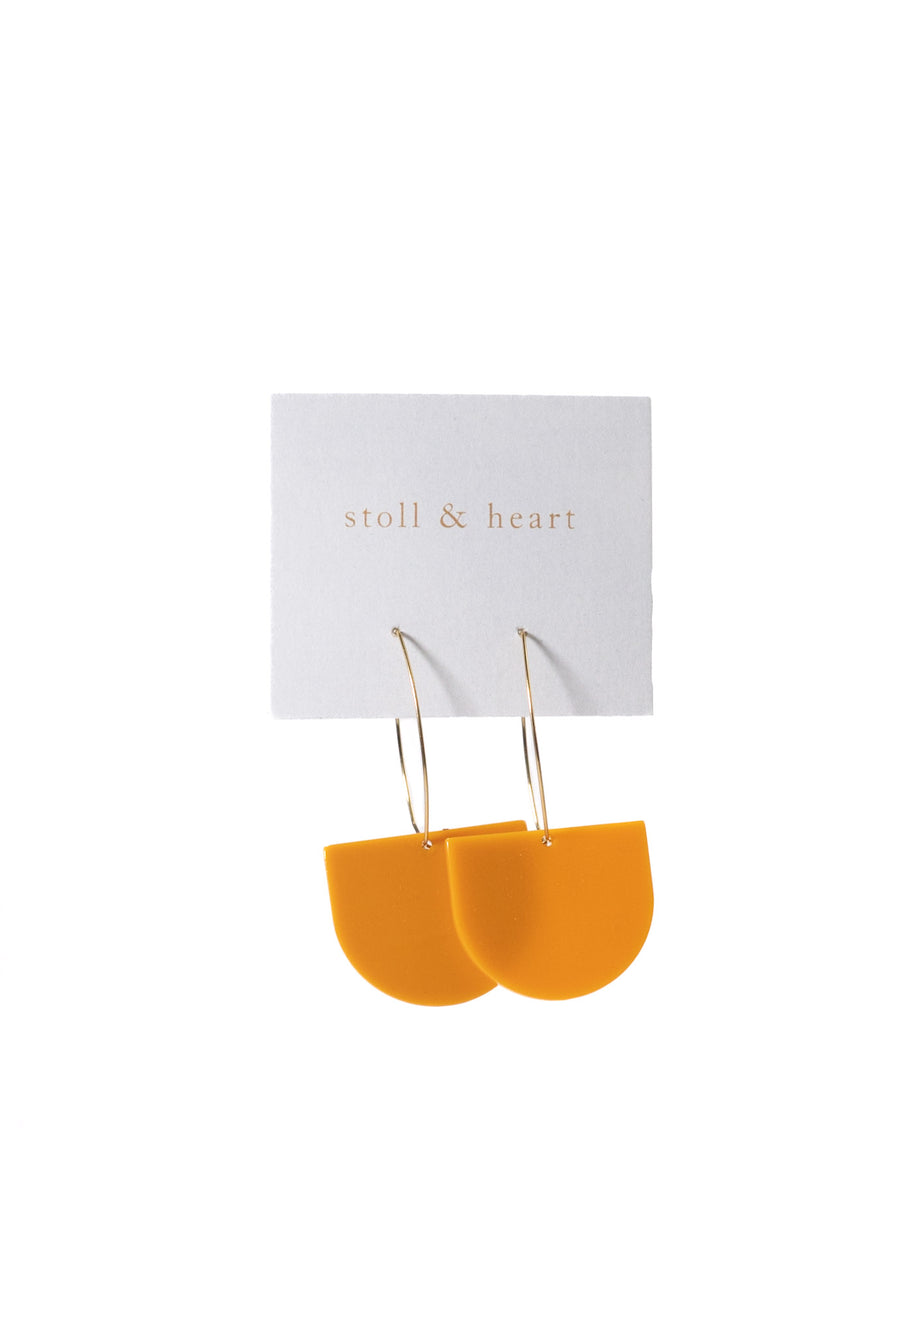 The Modern Brass w/Apricot by Stoll & Heart